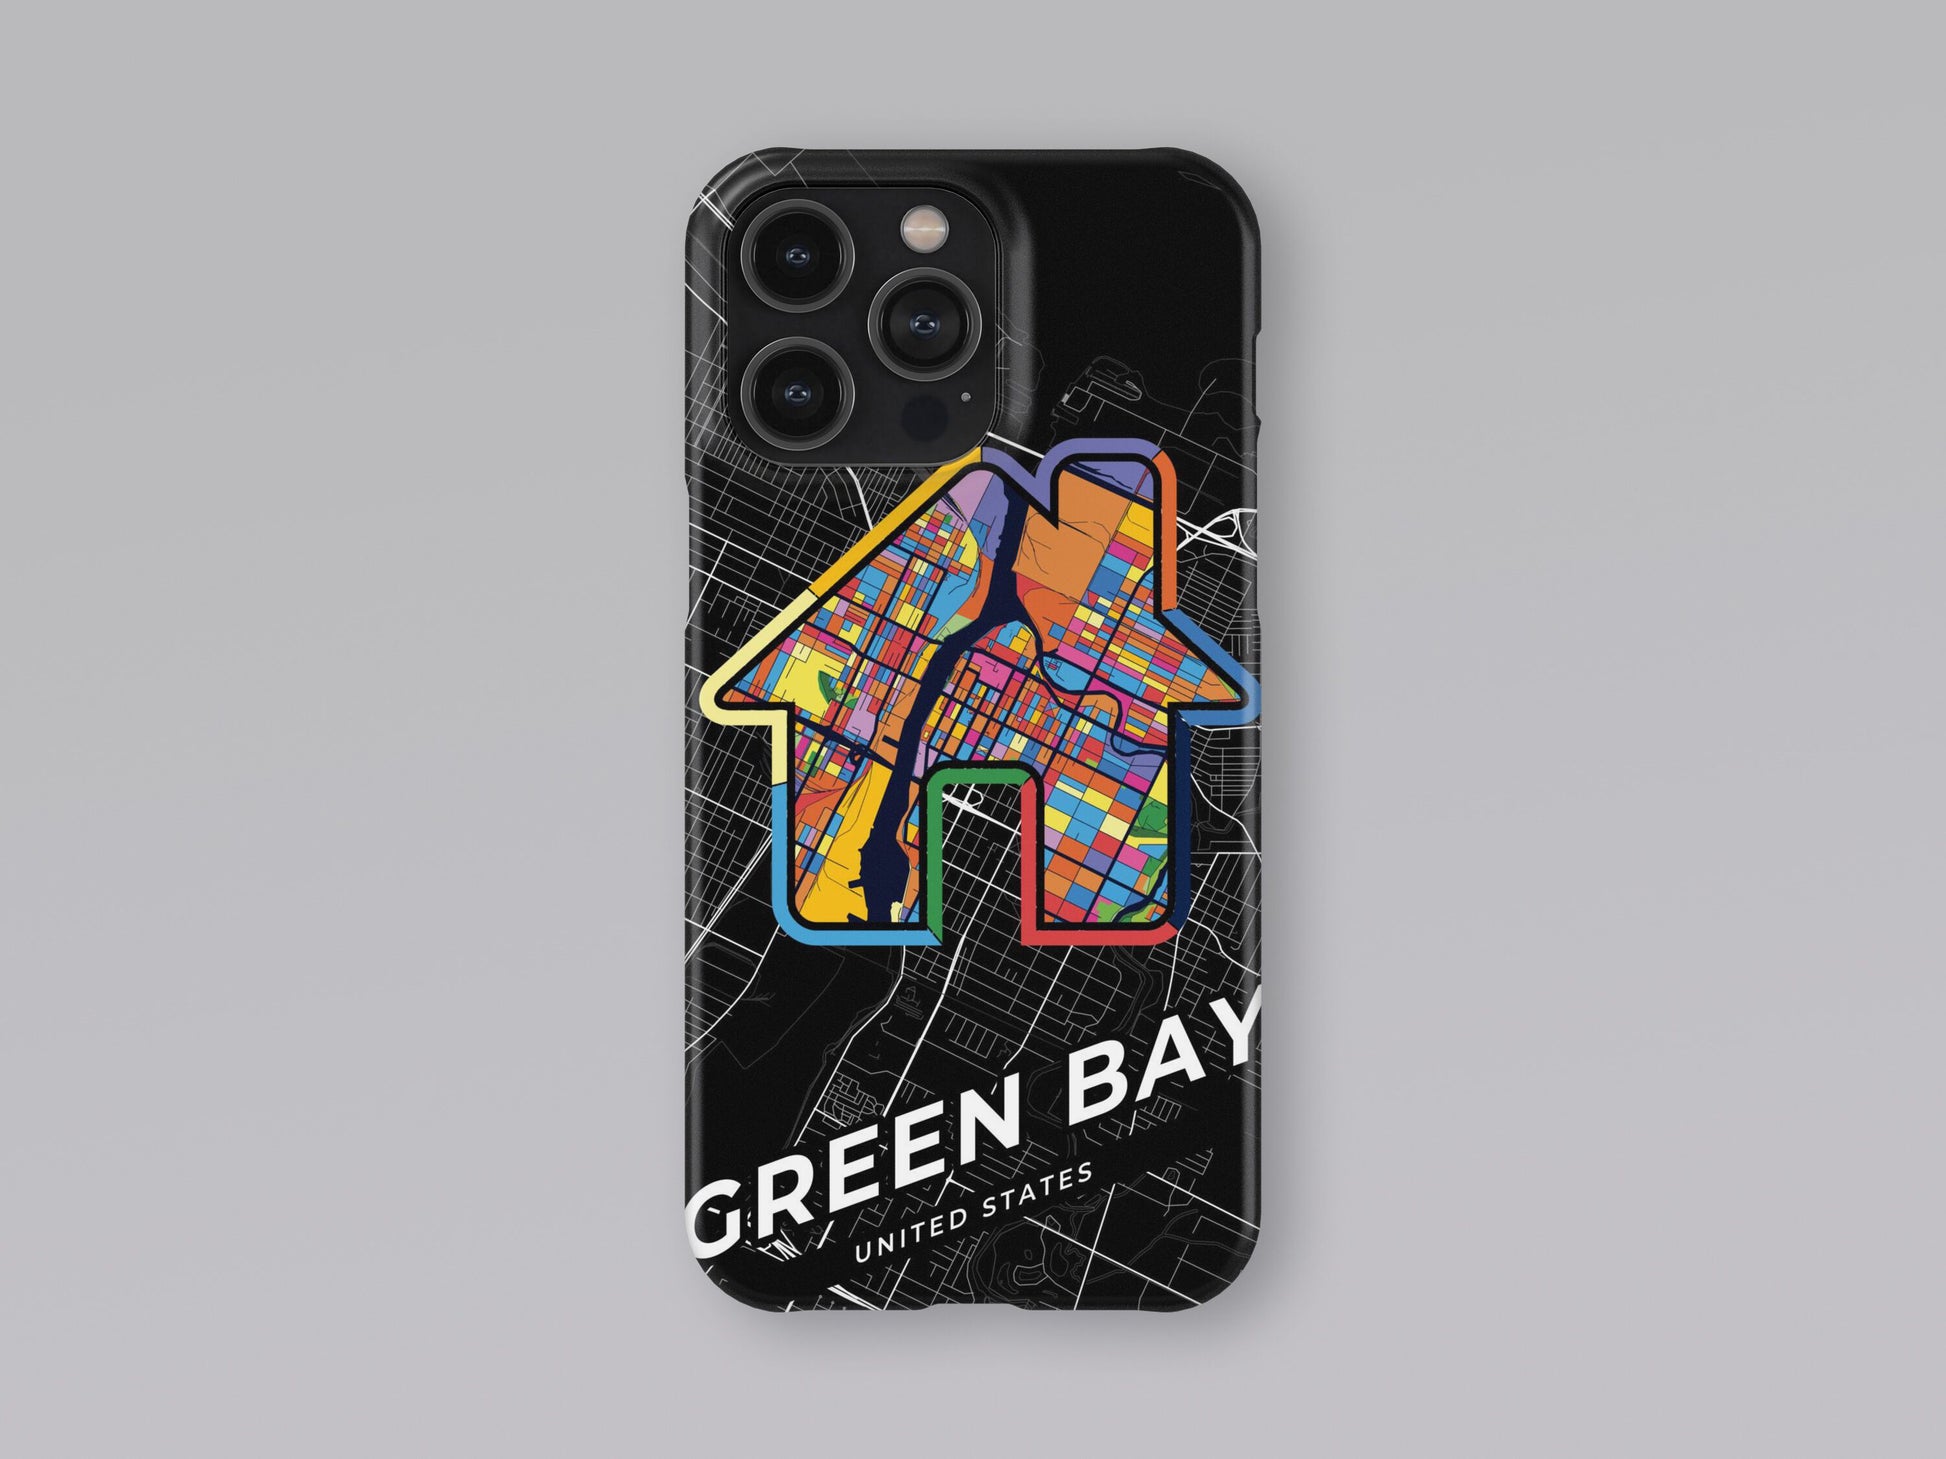 Green Bay Wisconsin slim phone case with colorful icon. Birthday, wedding or housewarming gift. Couple match cases. 3